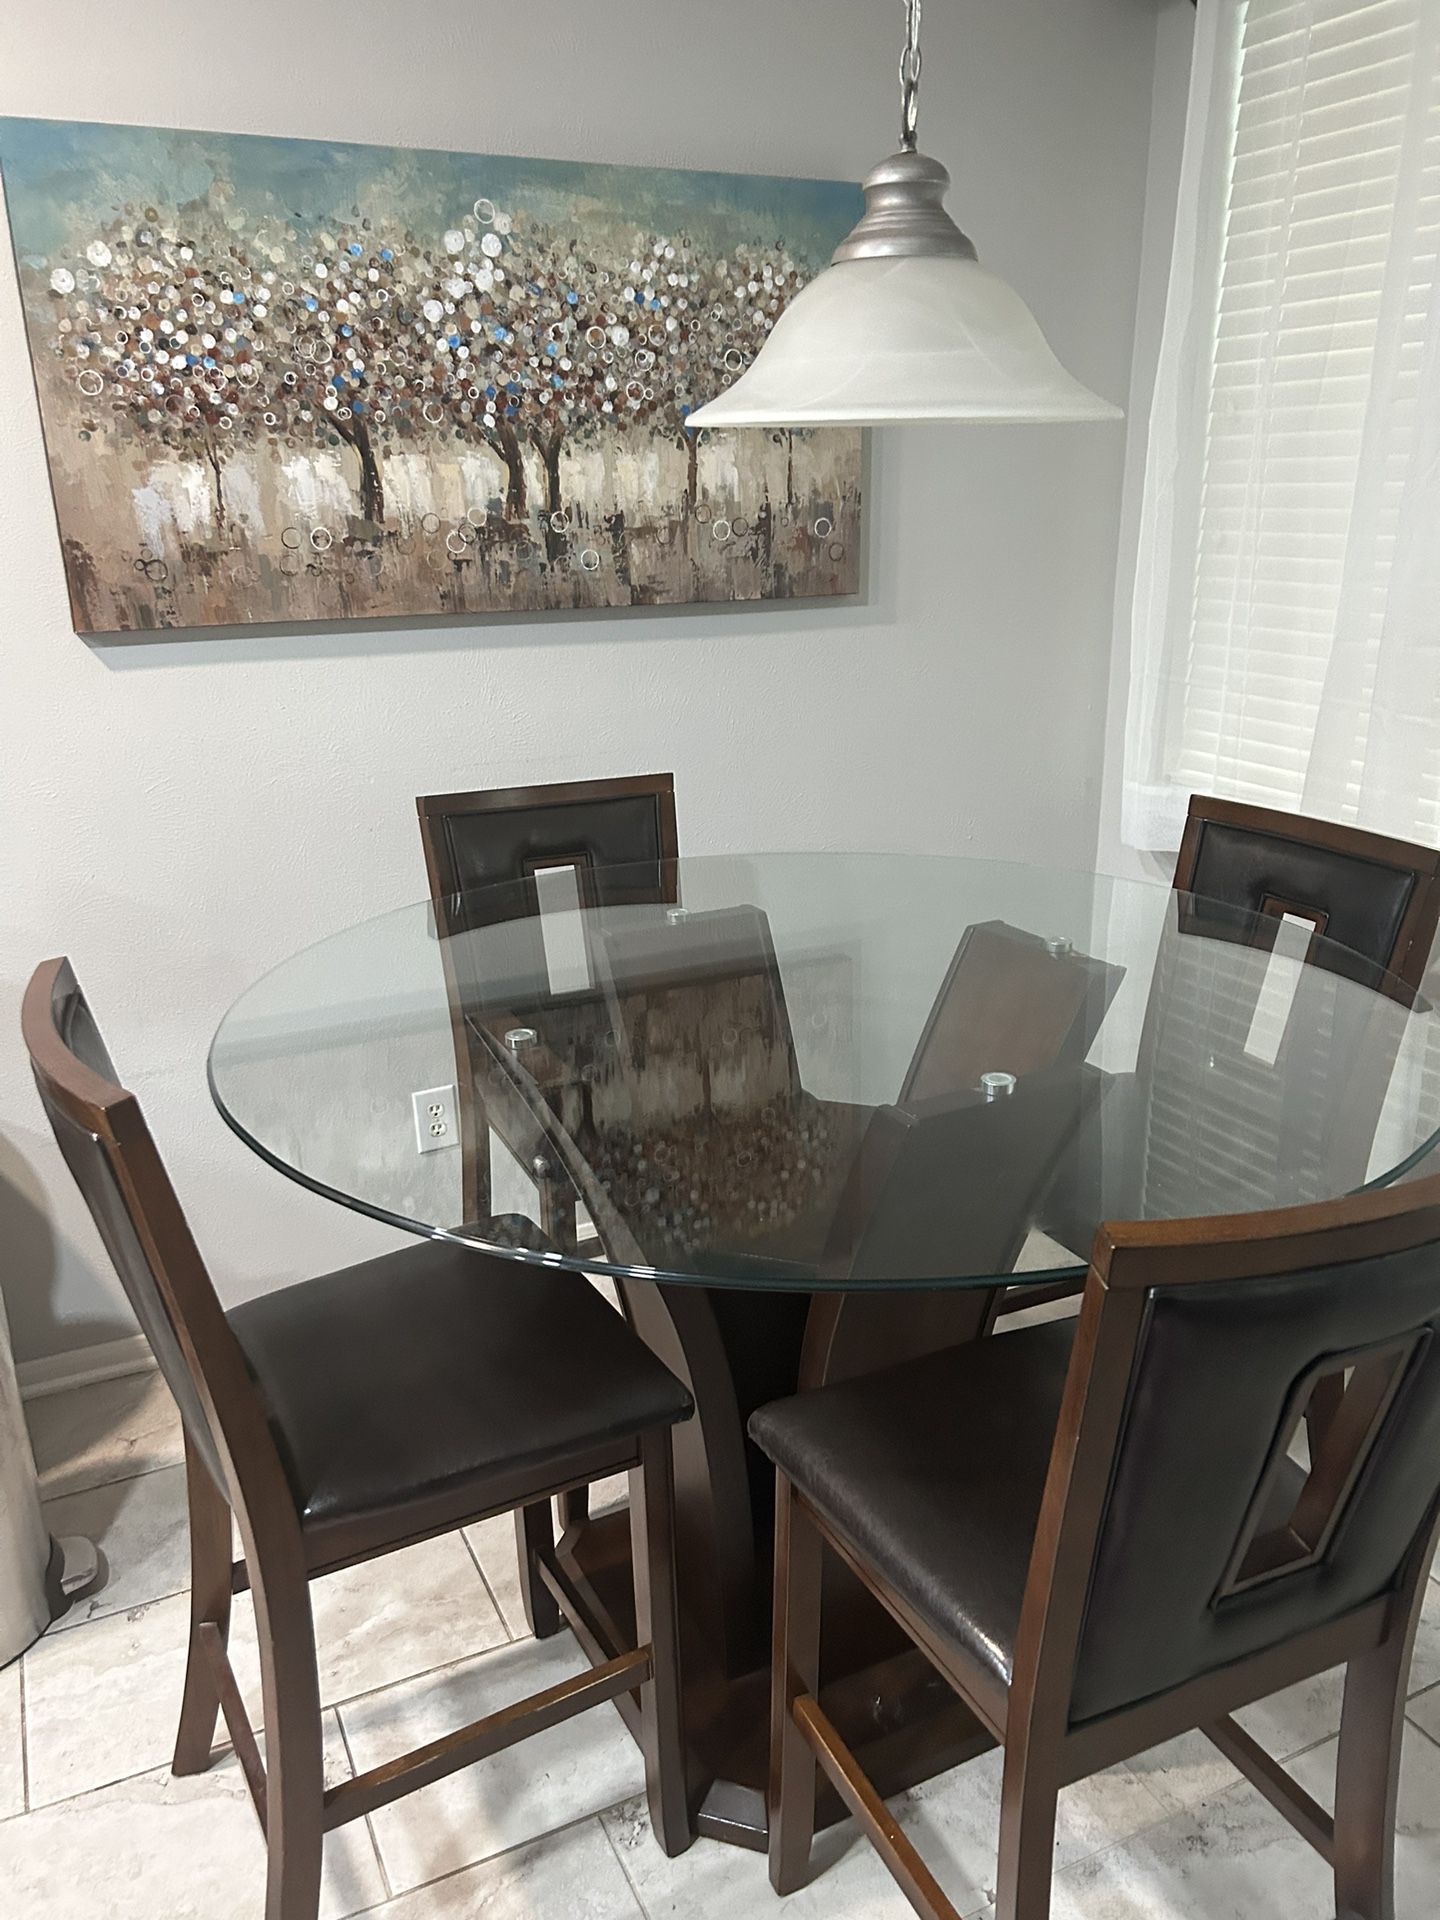 Kitchen Table & Bar Height Chairs